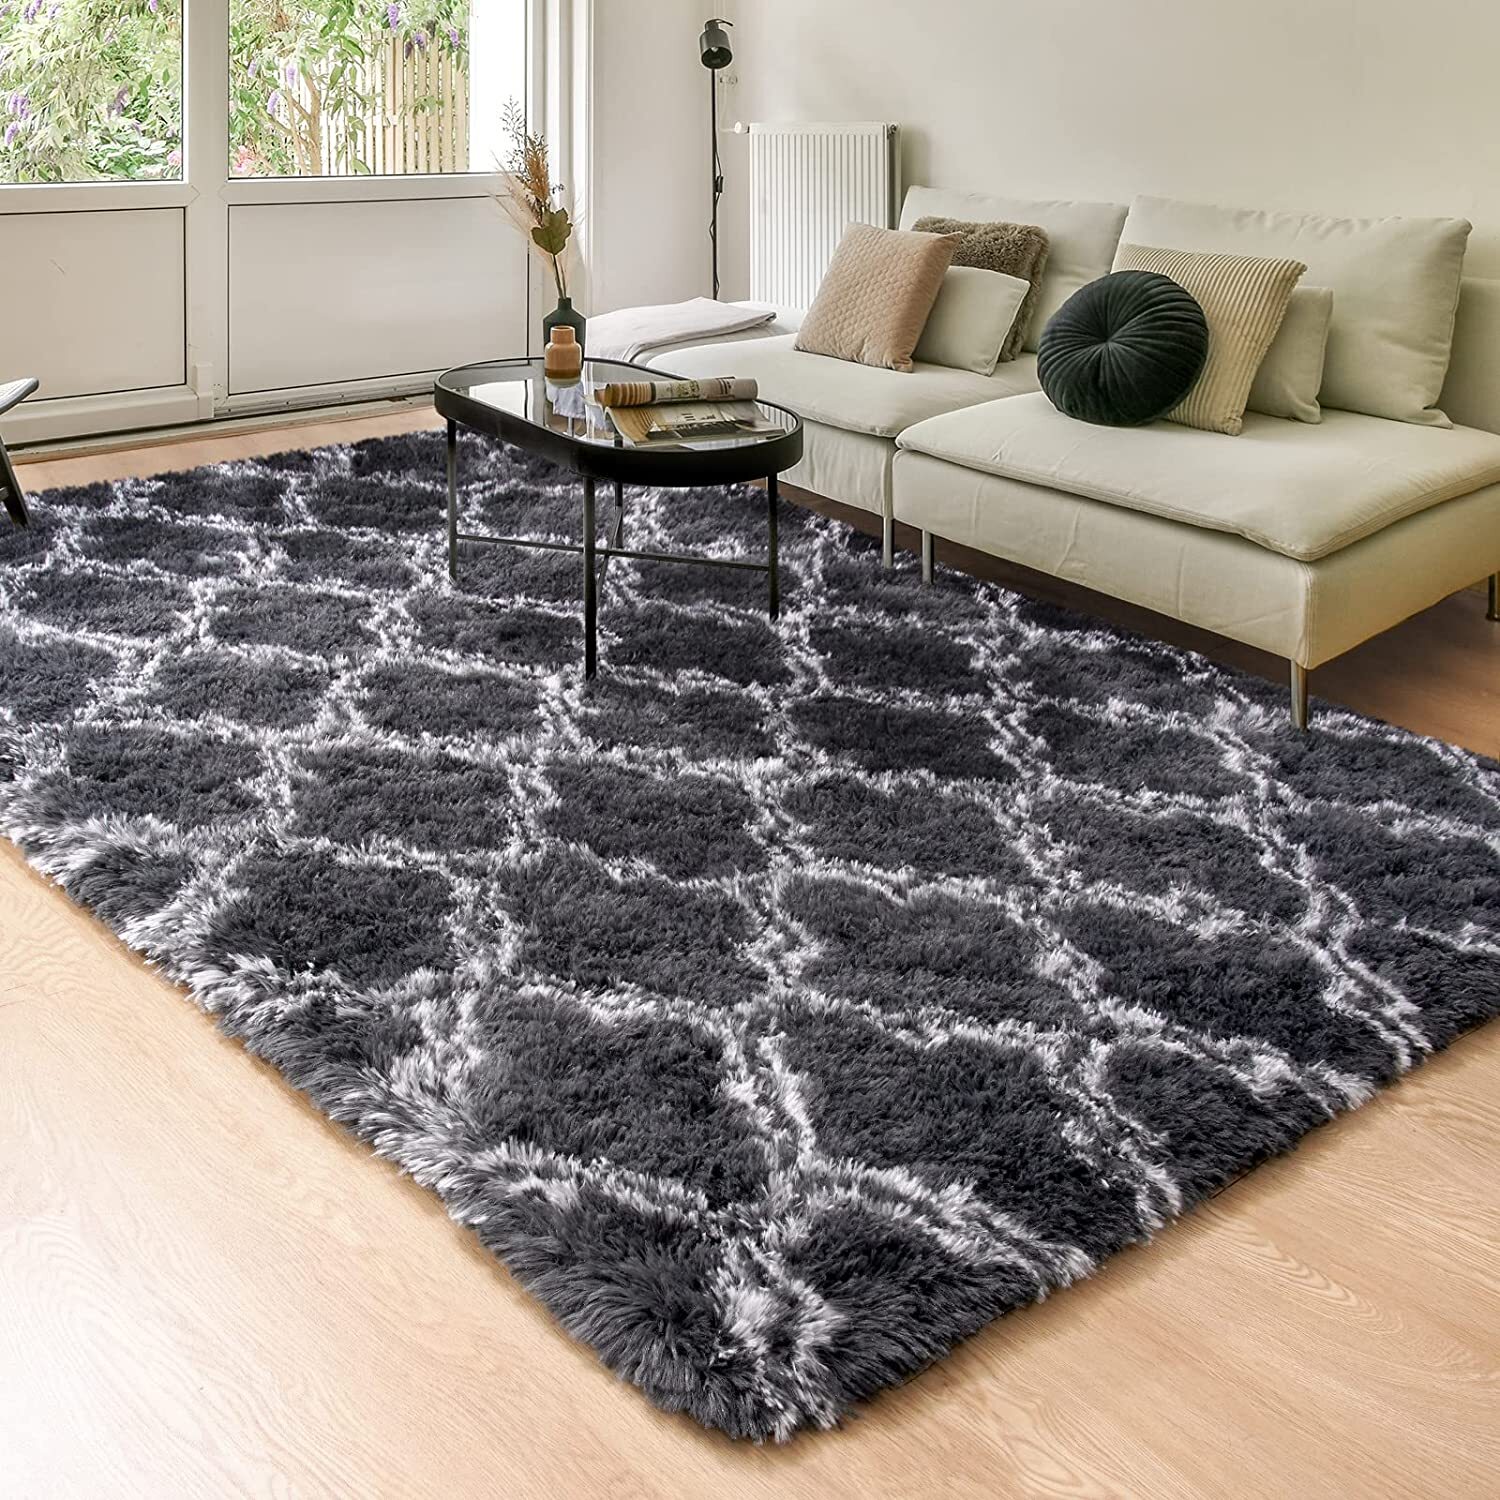 Luxe Brdroom / Living Room Comfortable Long Shag Rug (Honeycomb Pattern)